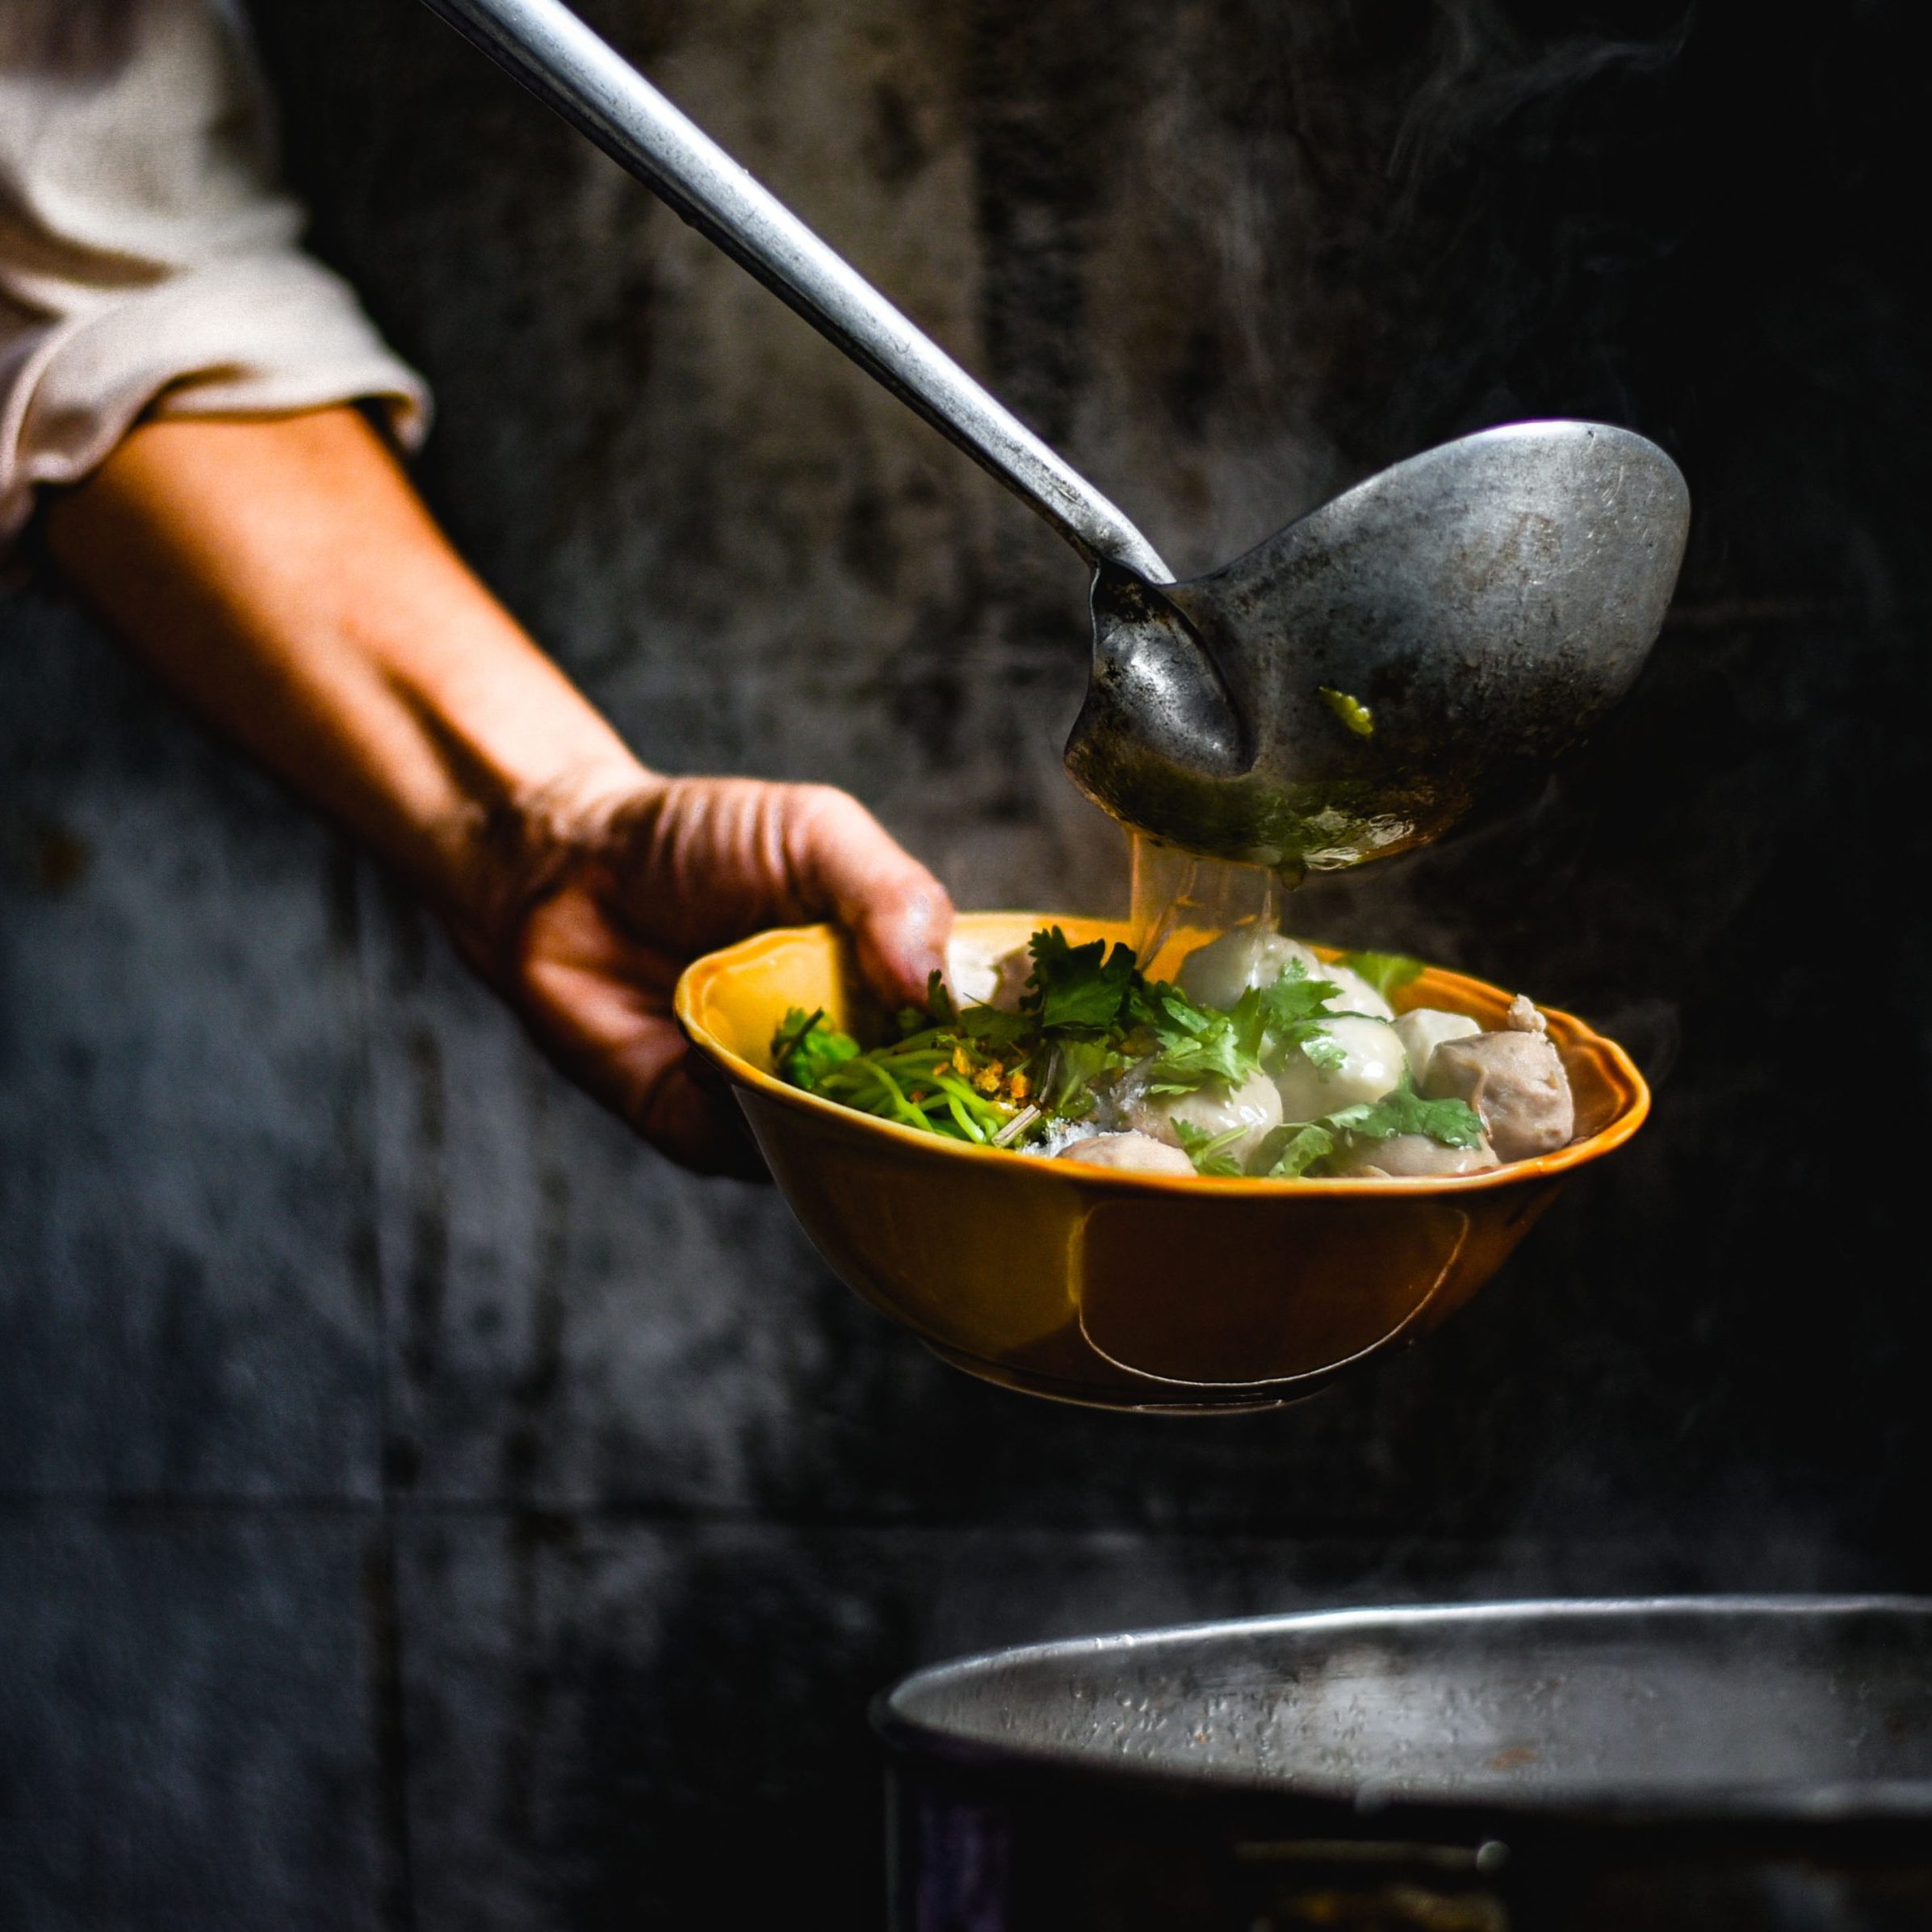 Hands of Thai Chef are scooping a delicious soup topped with noodles and pork balls in the corner of the restaurant with light shining to the noodle bowl that is traditional Thai food.